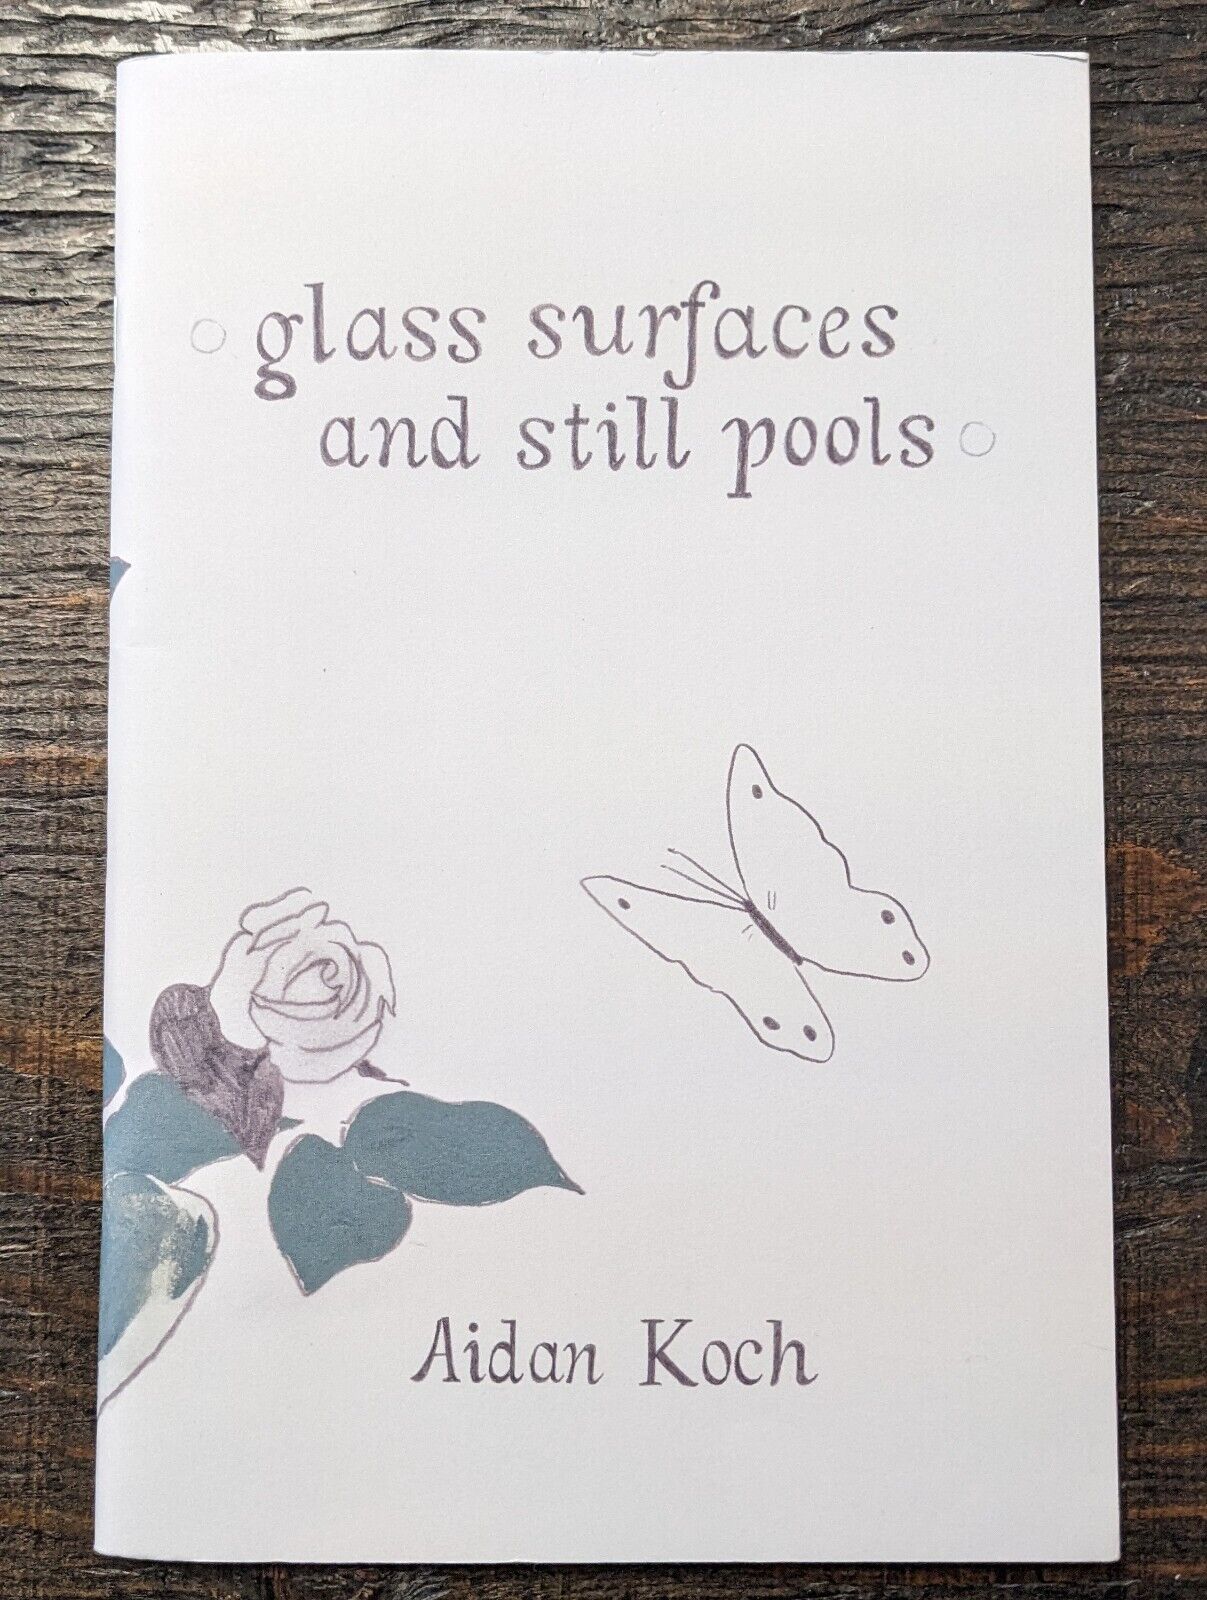 Aidan Koch - glass surfaces and still pools (2015) edition of 250